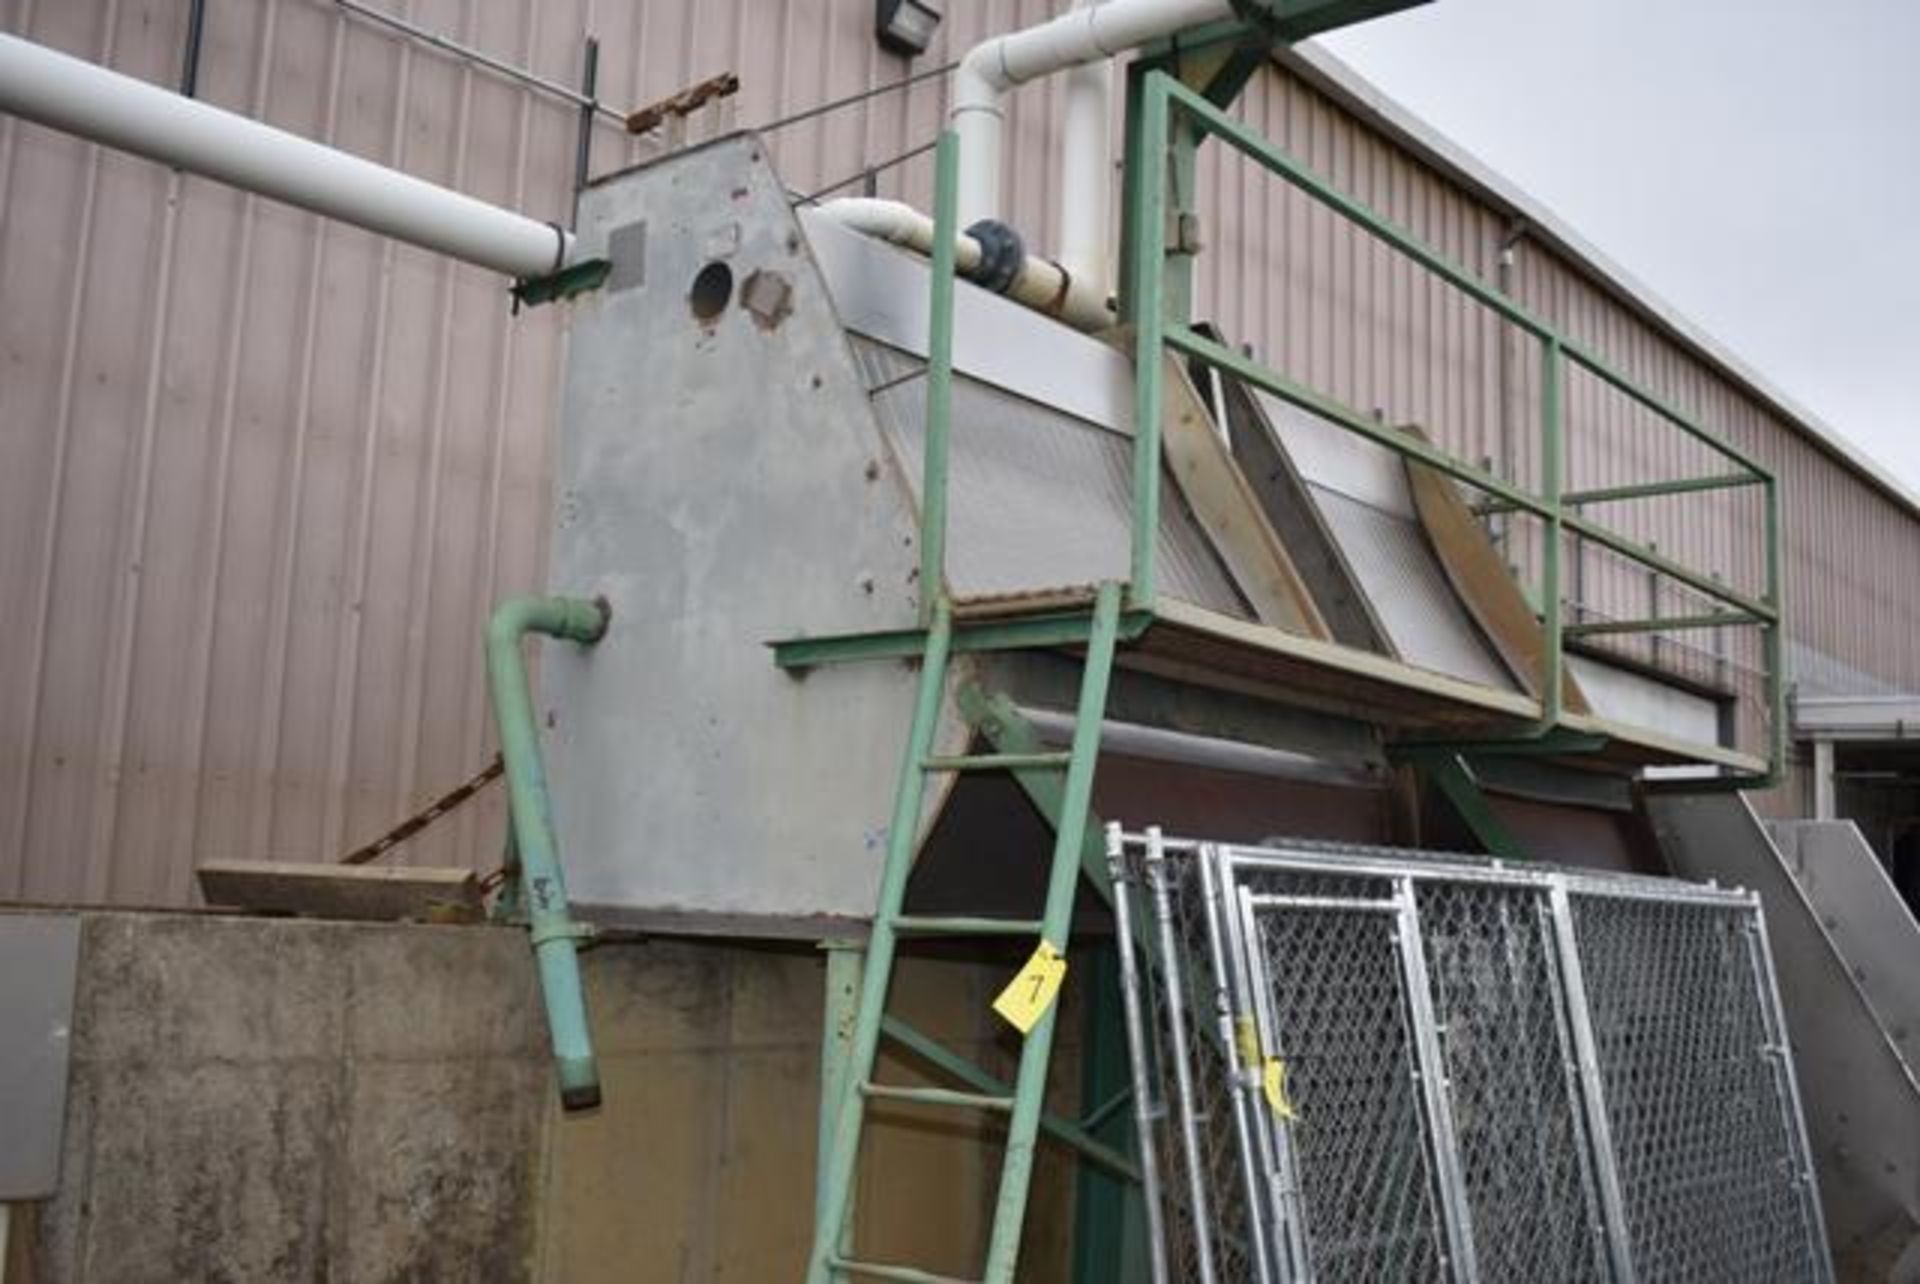 Bauer 60"L x 42"H Stainless Steel Hydrasieve, Loading Fee: $800